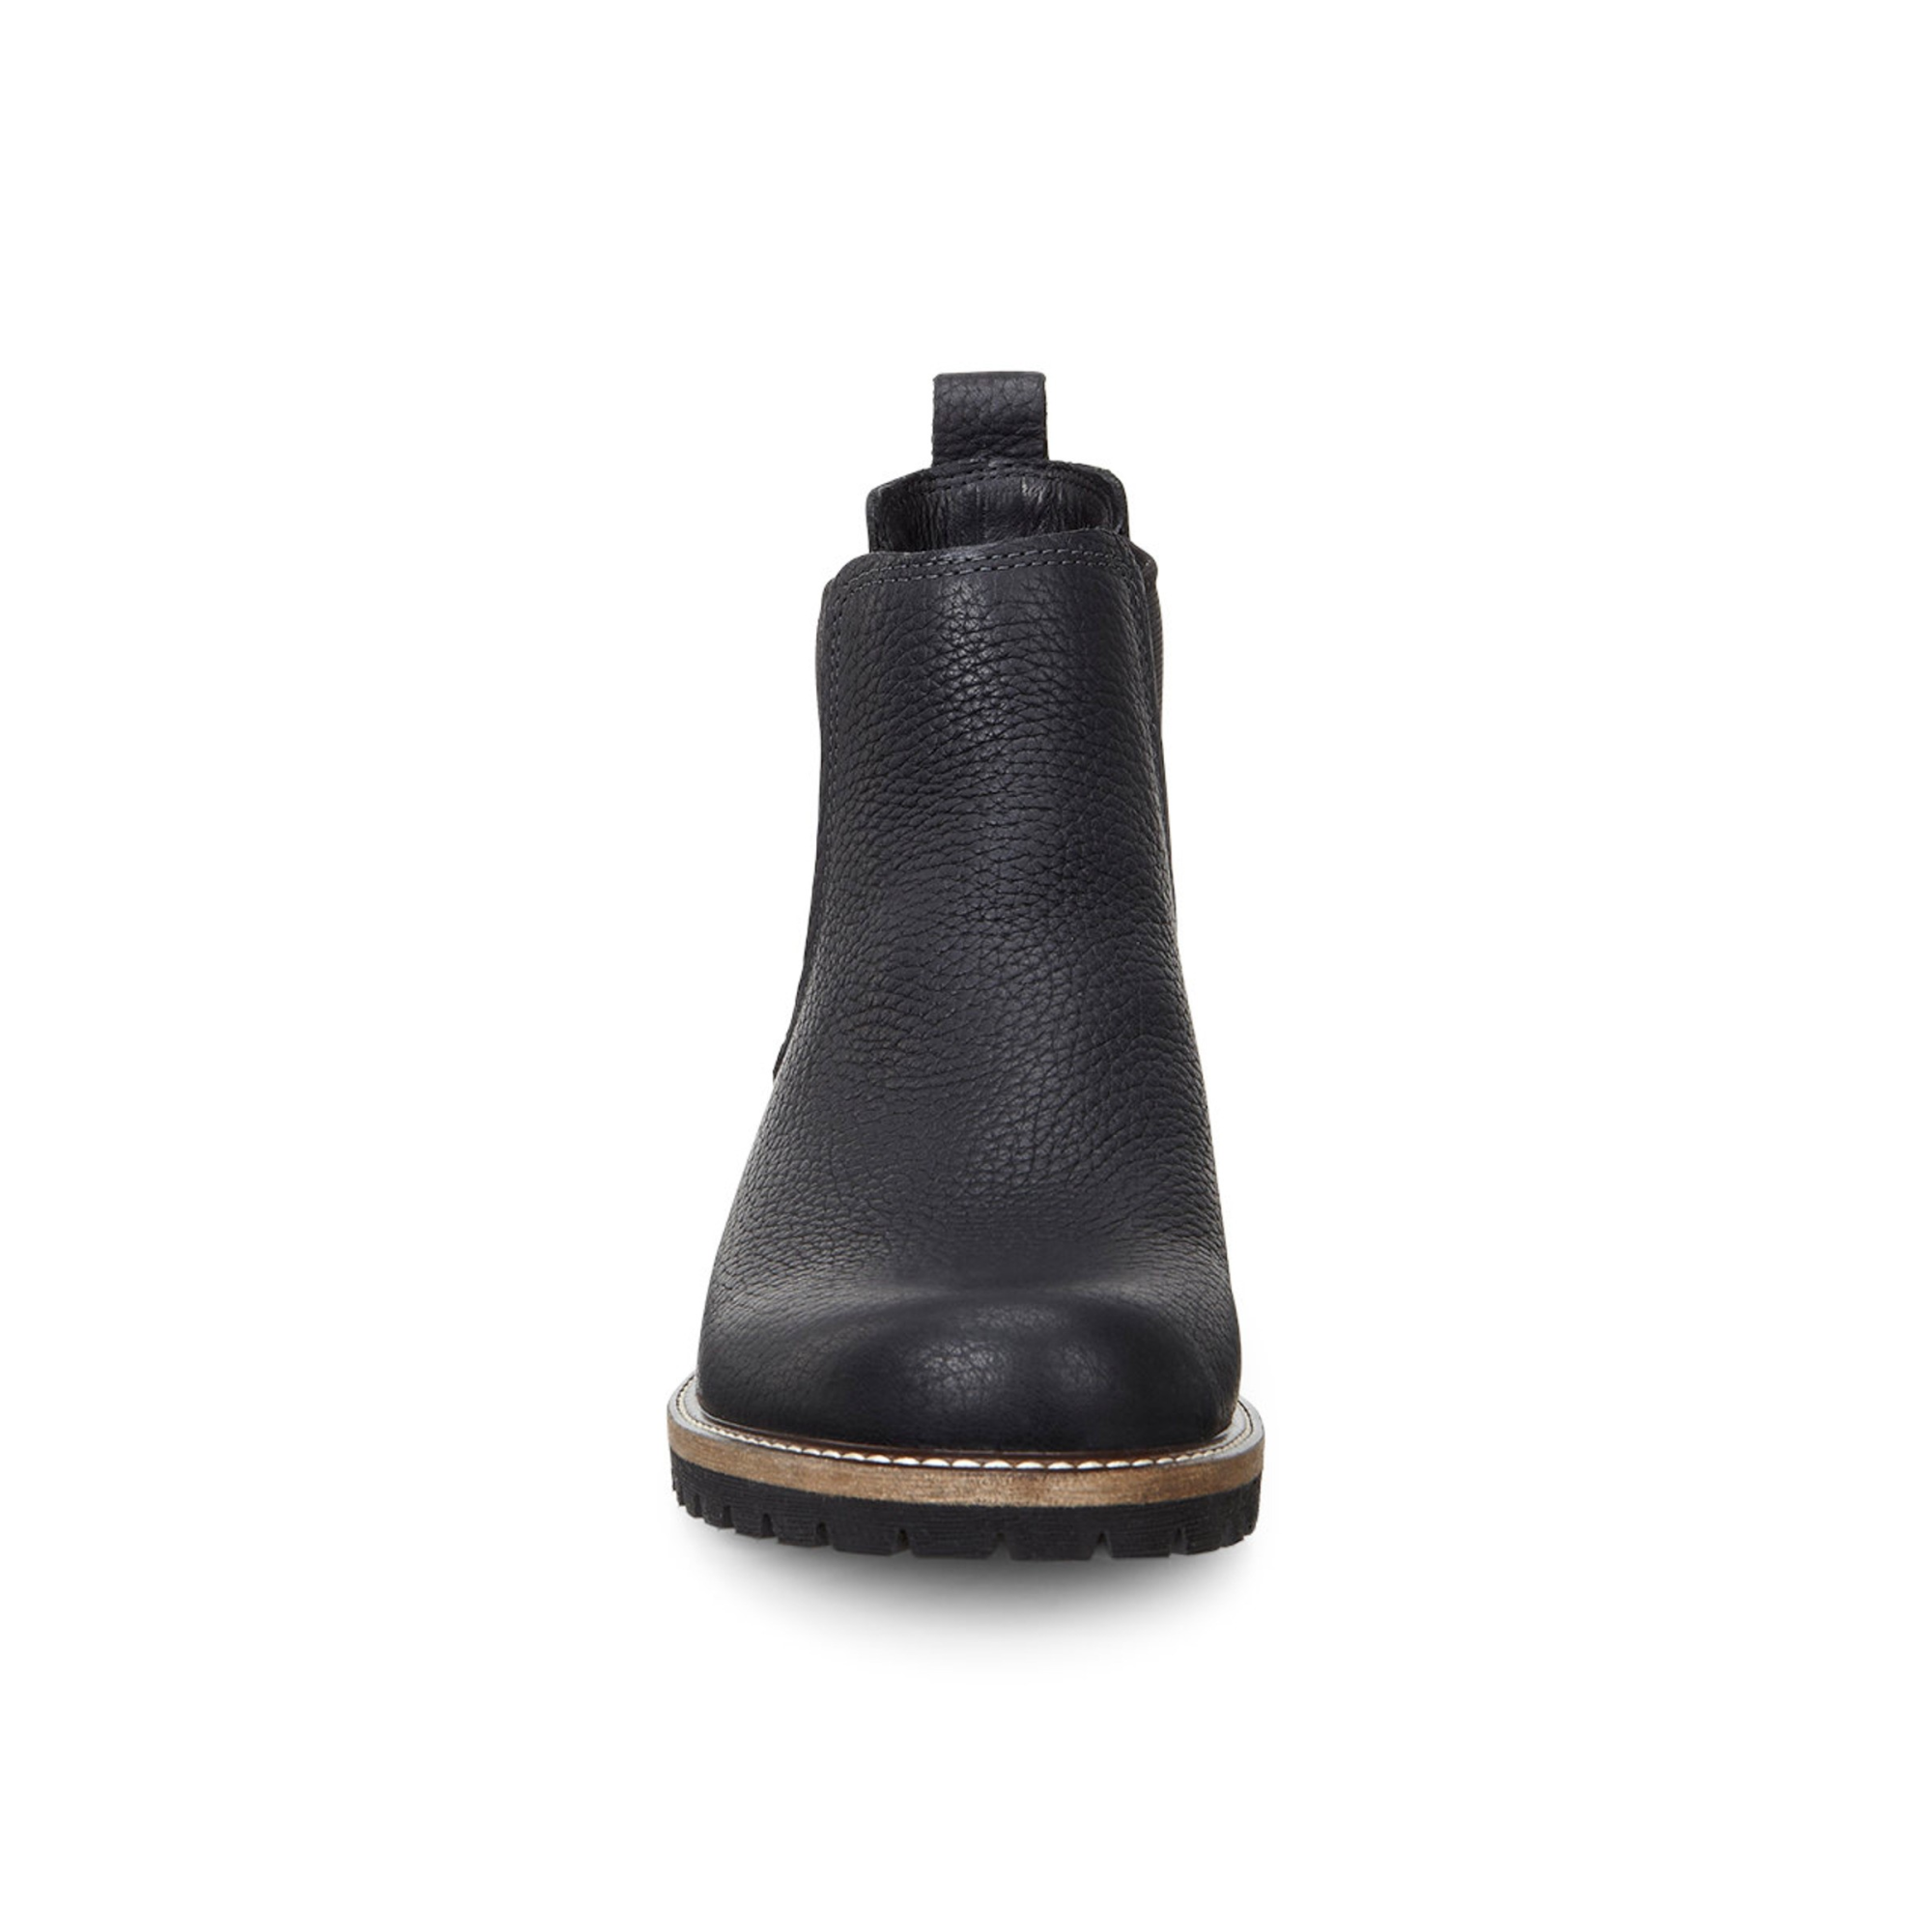 tom skammel bent Ecco ELAINE Chelsea Boot 40 - Products - Veryk Mall - Veryk Mall, many  product, quick response, safe your money!